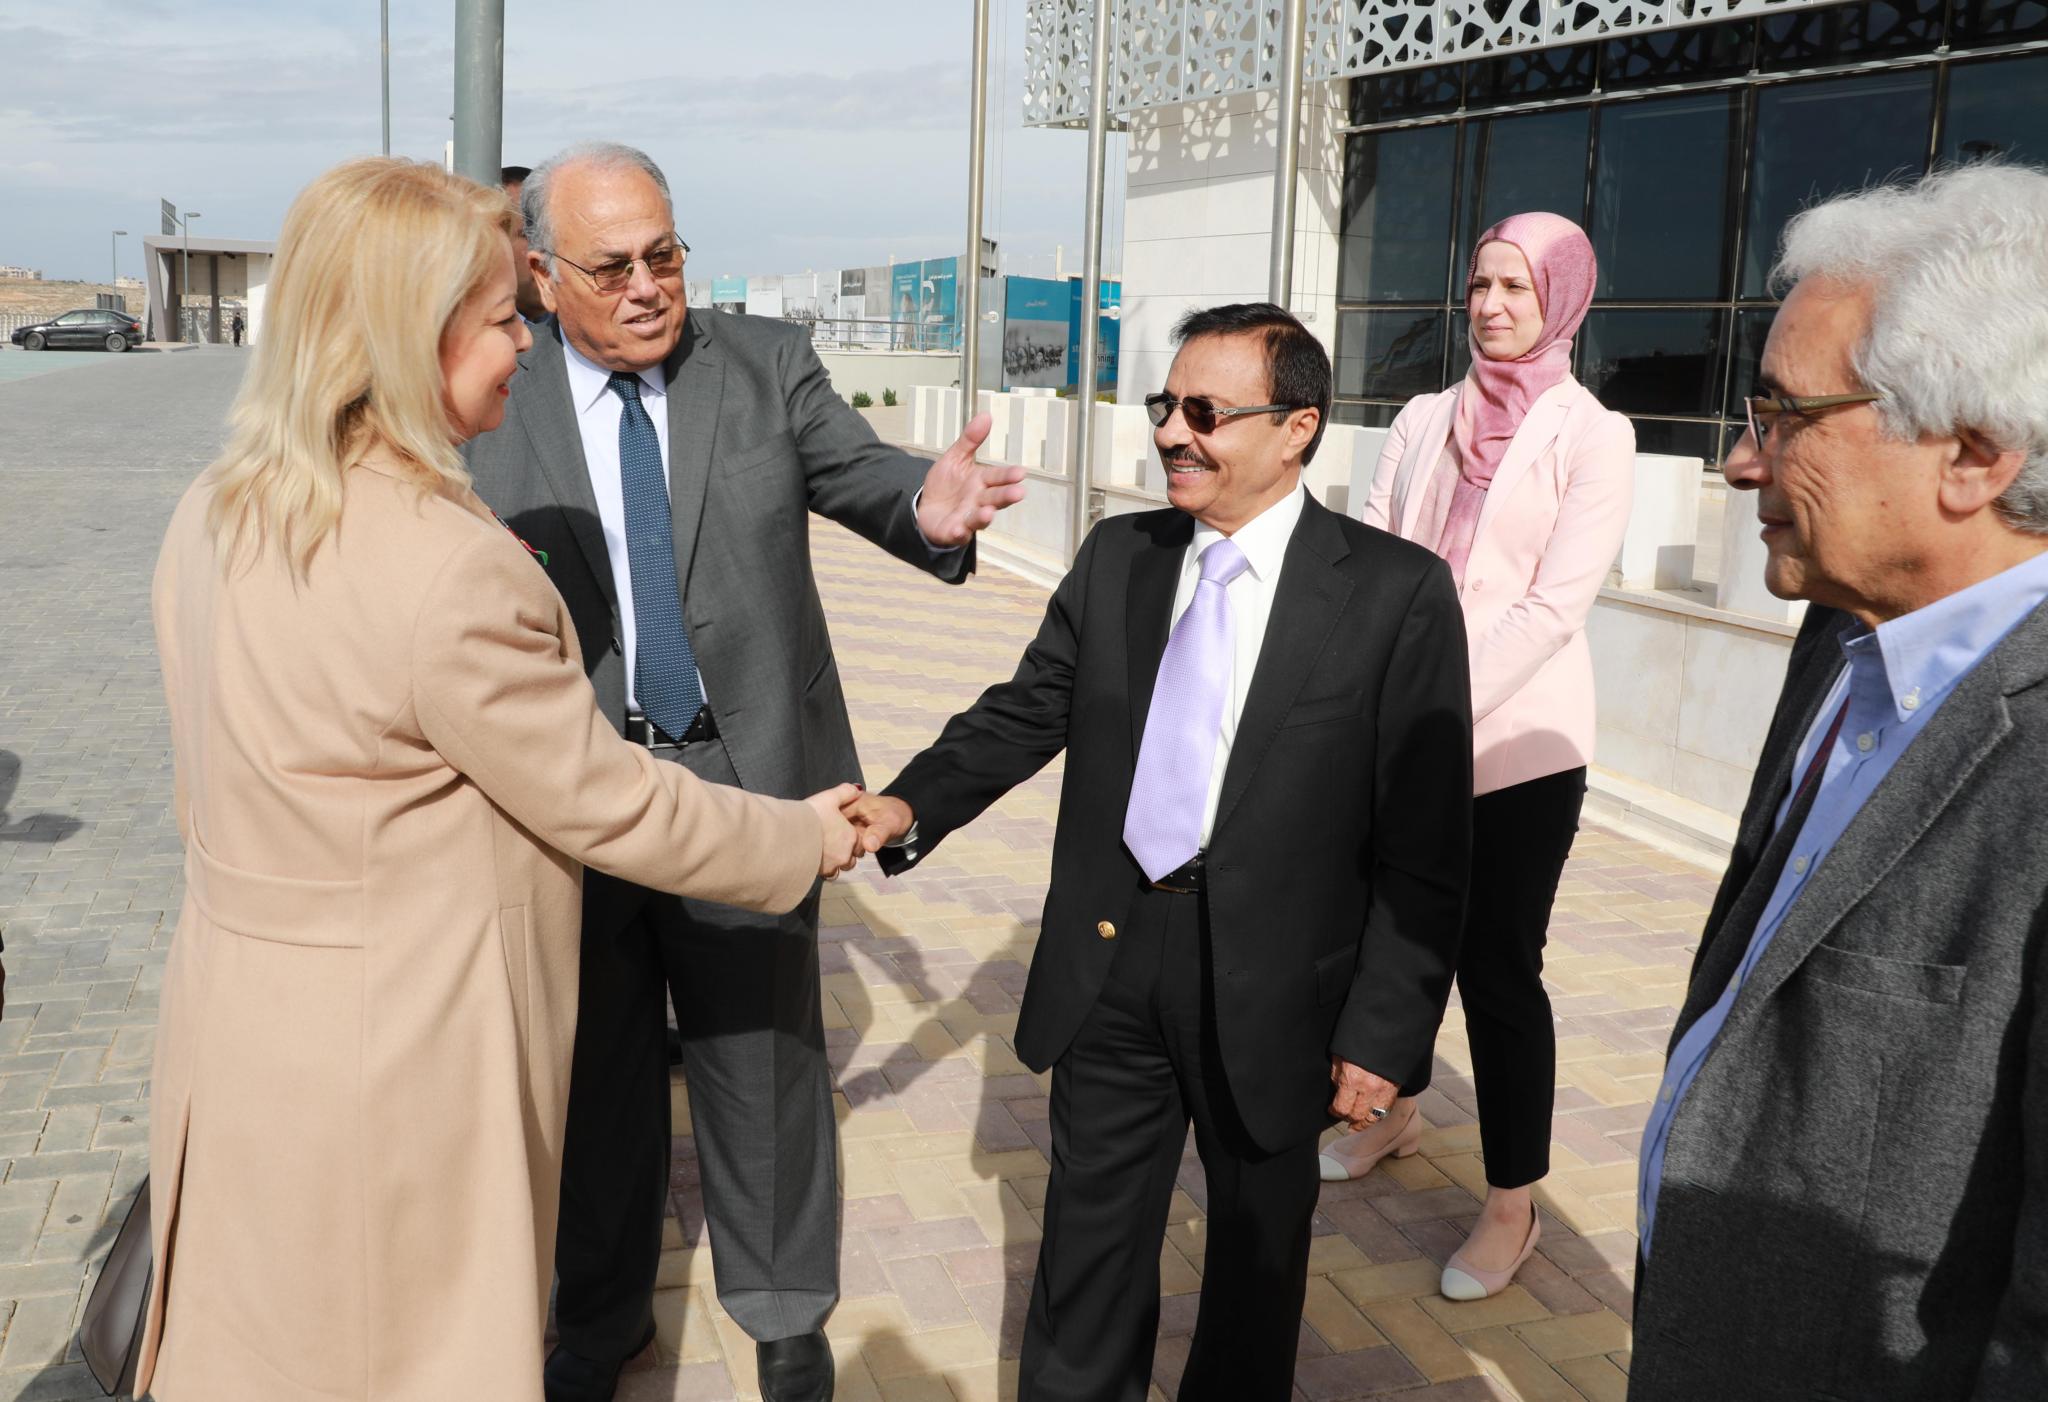 Part of the reception of the Advisor to the Prime Minister during her visit to the University